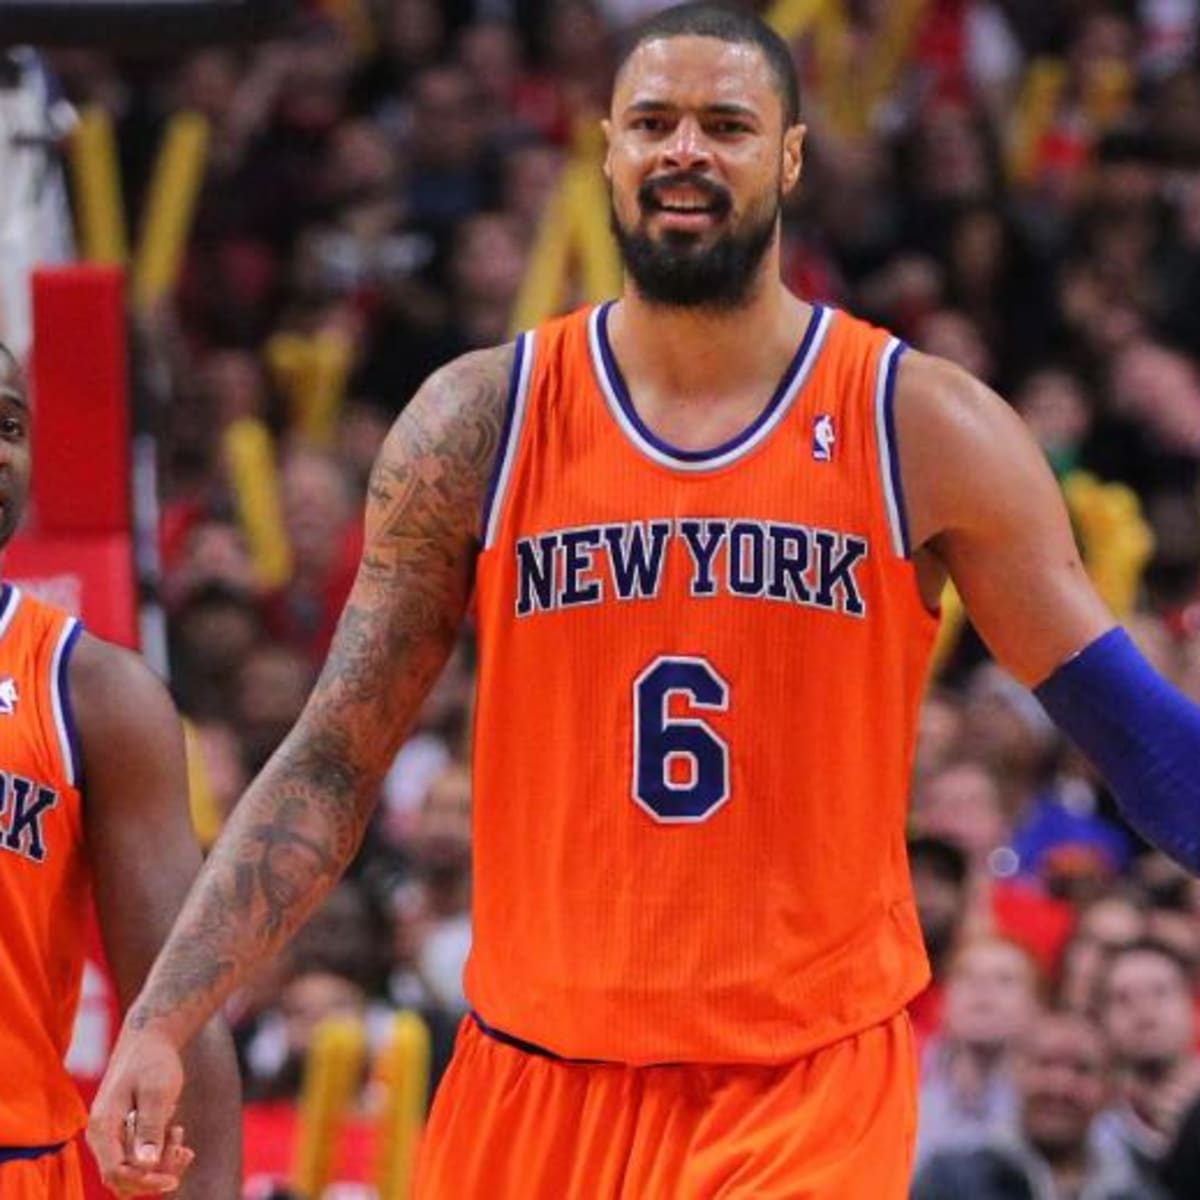 Hibbert destroyed him - New York fans divided on Tyson Chandler's wild  take about the Knicks being championship team in 2013